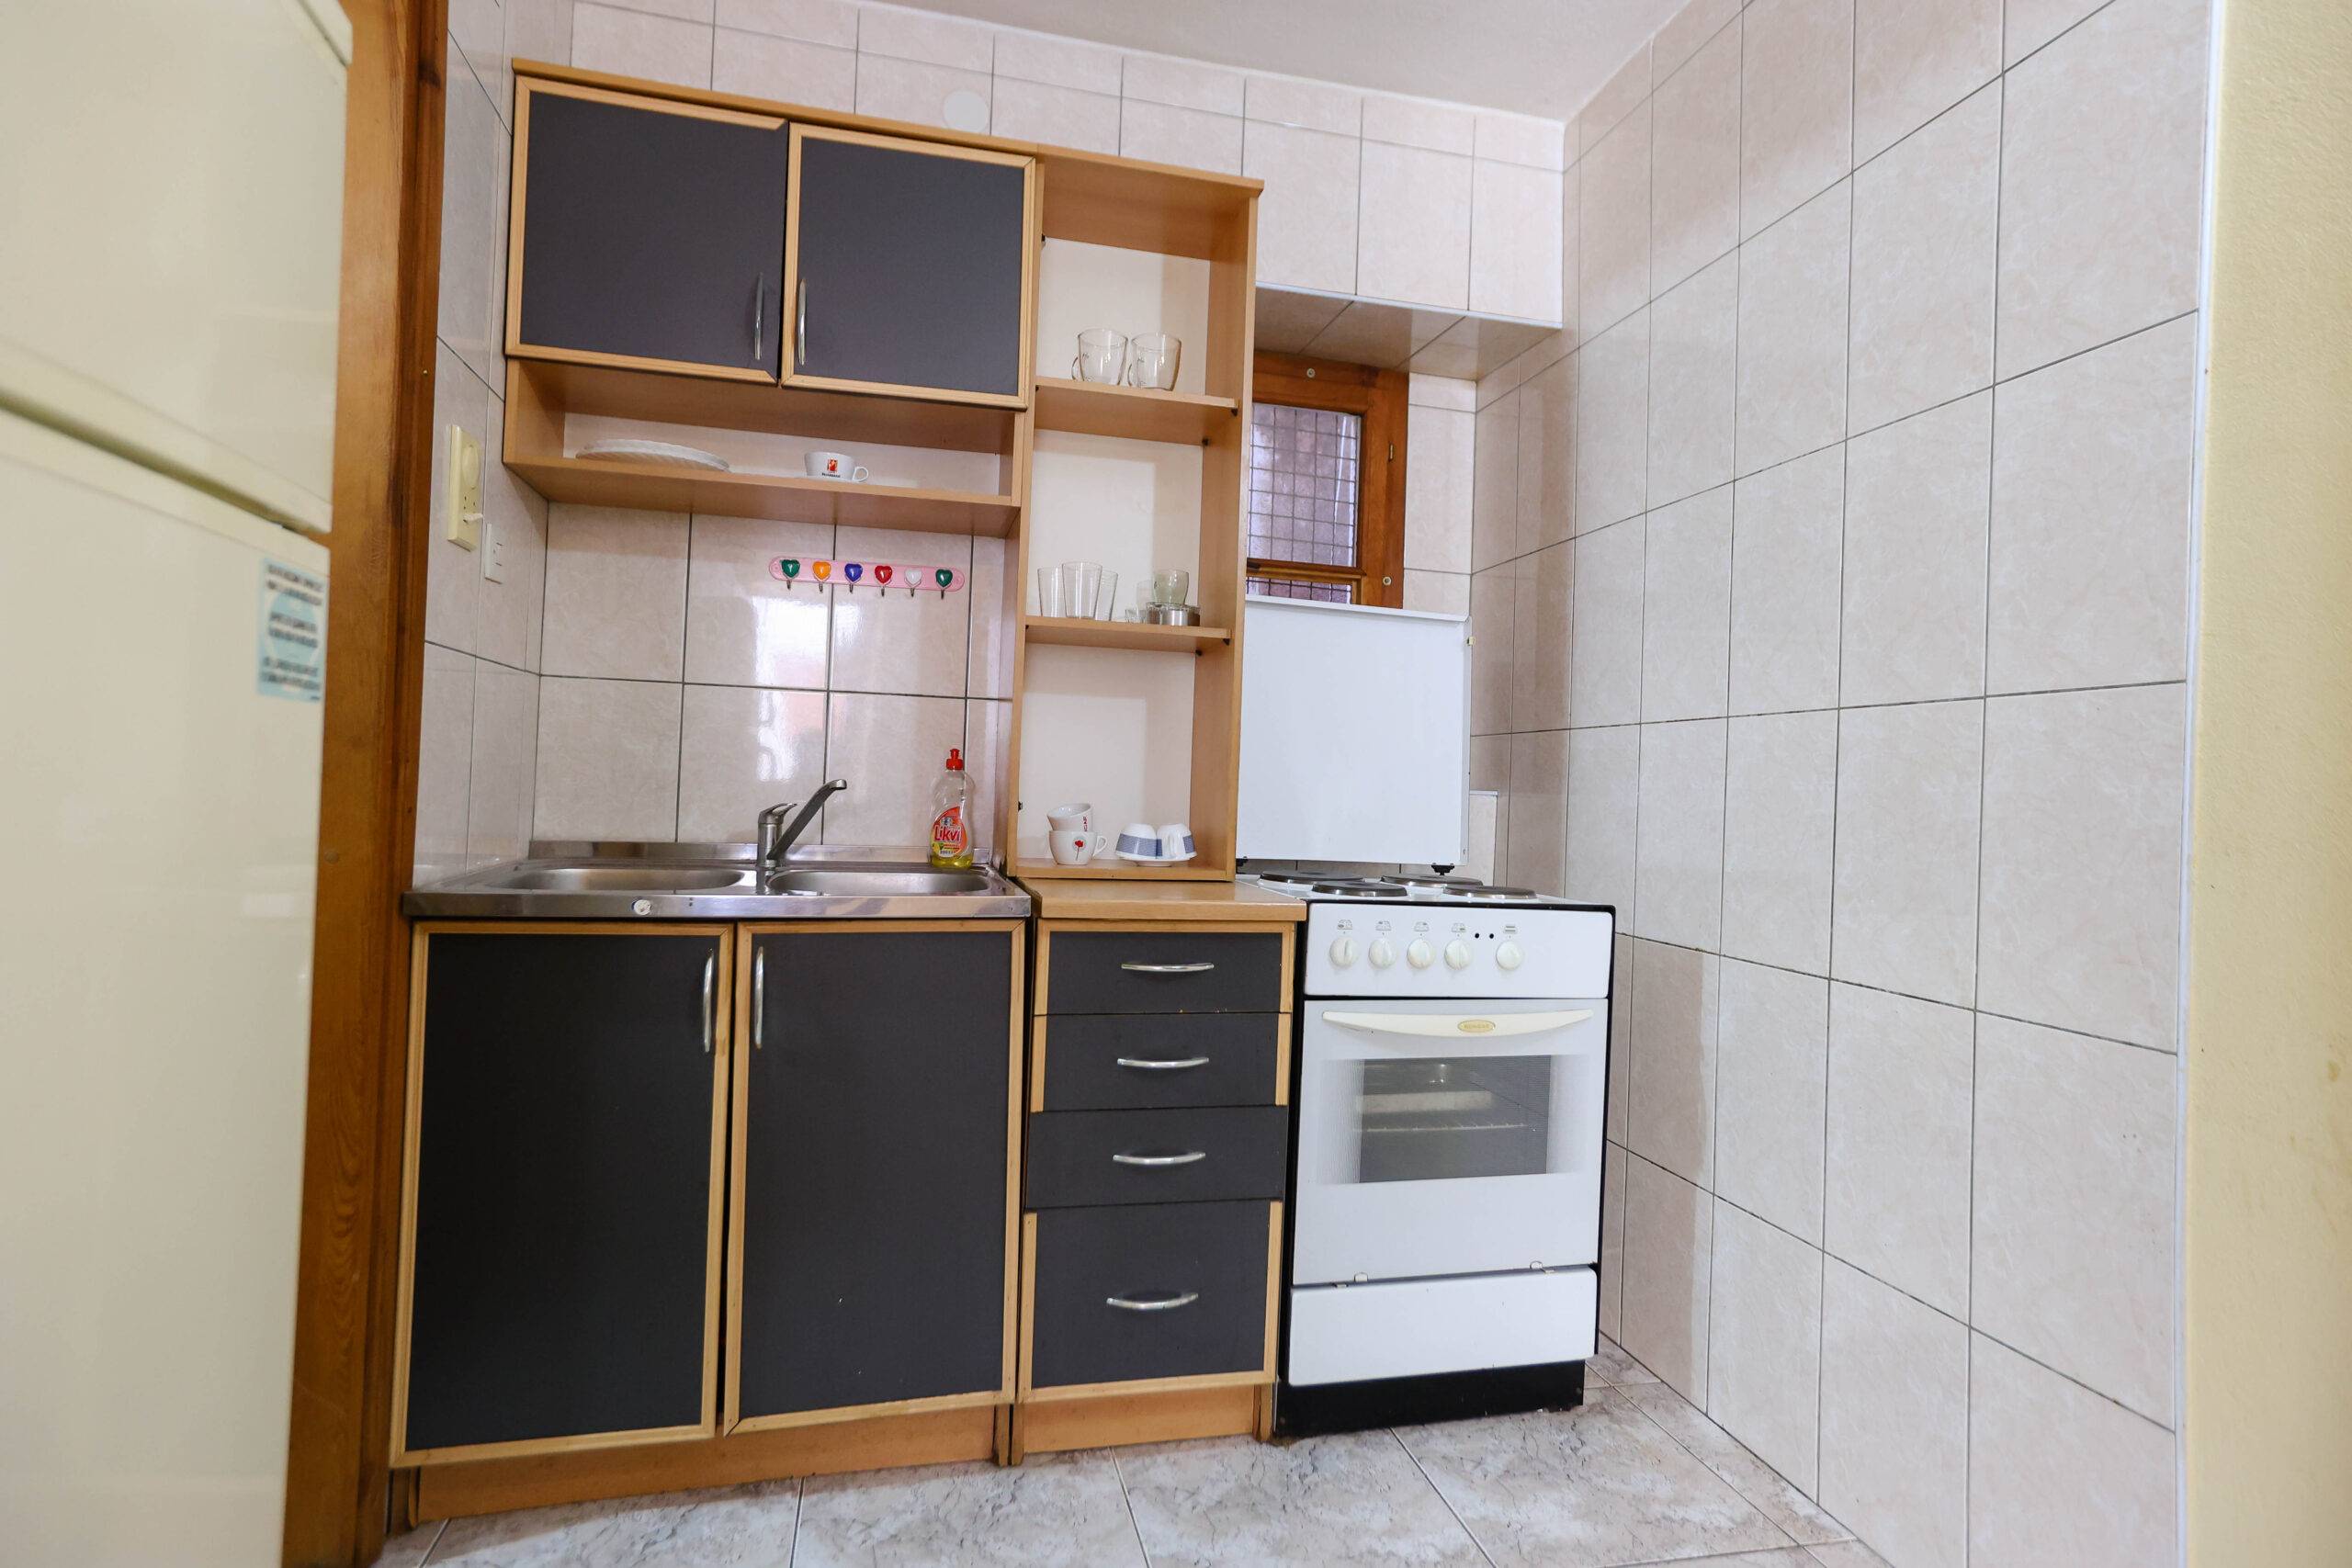 HOUSE FOR SALE ( Kotor)